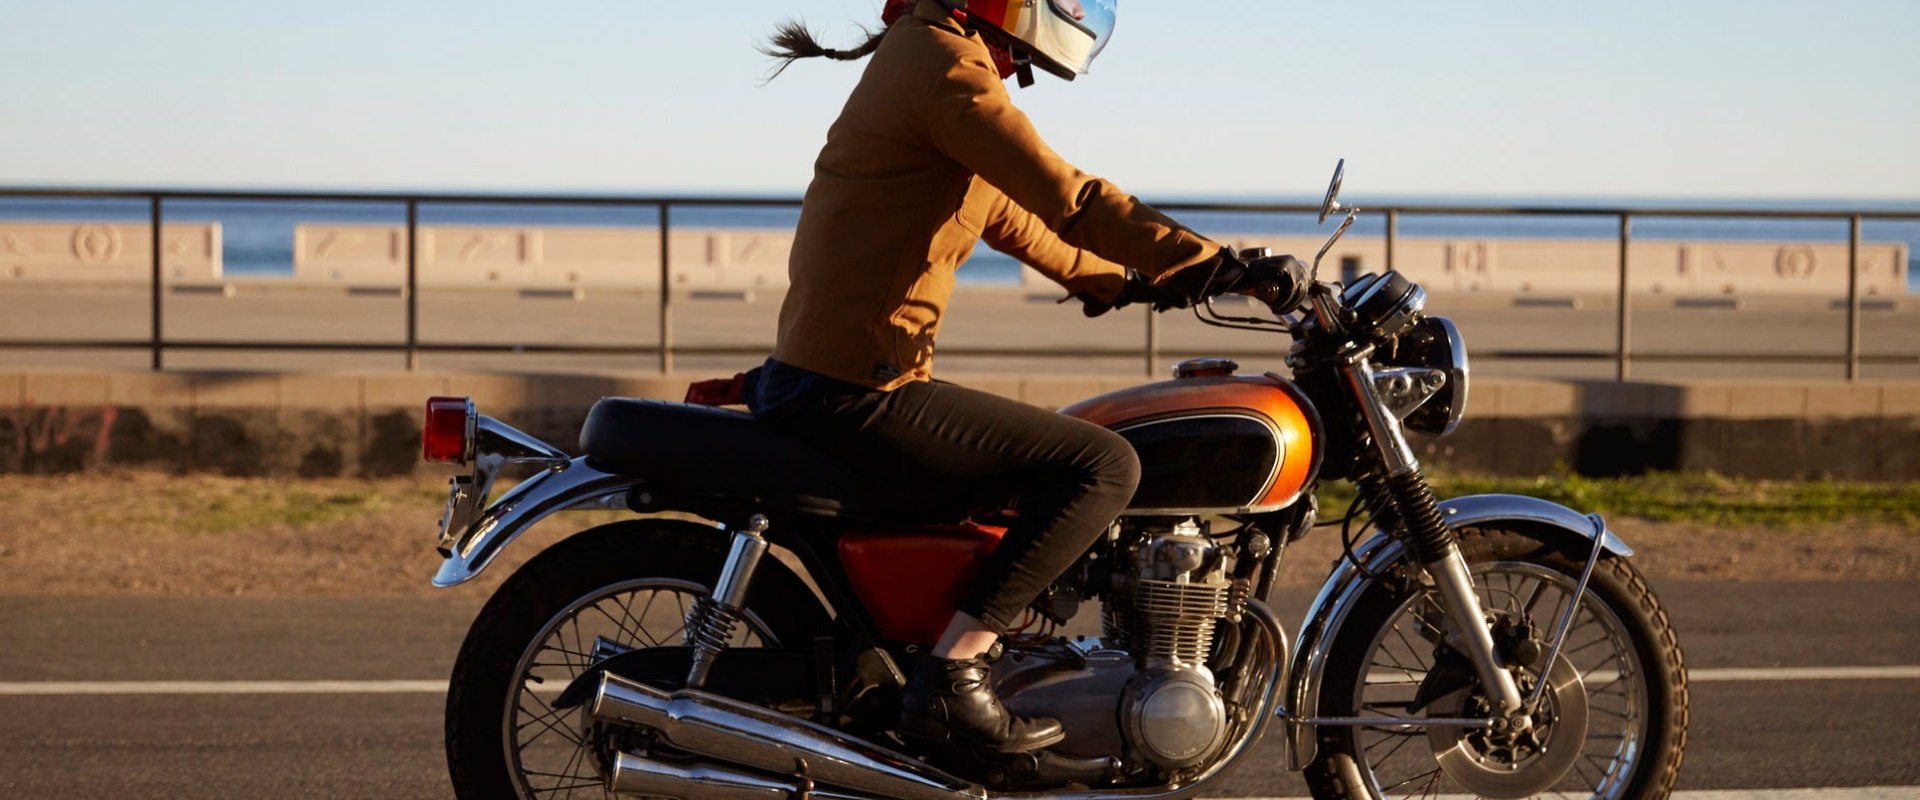 What Does Motorcycle Insurance Cover and Is It Worth It?